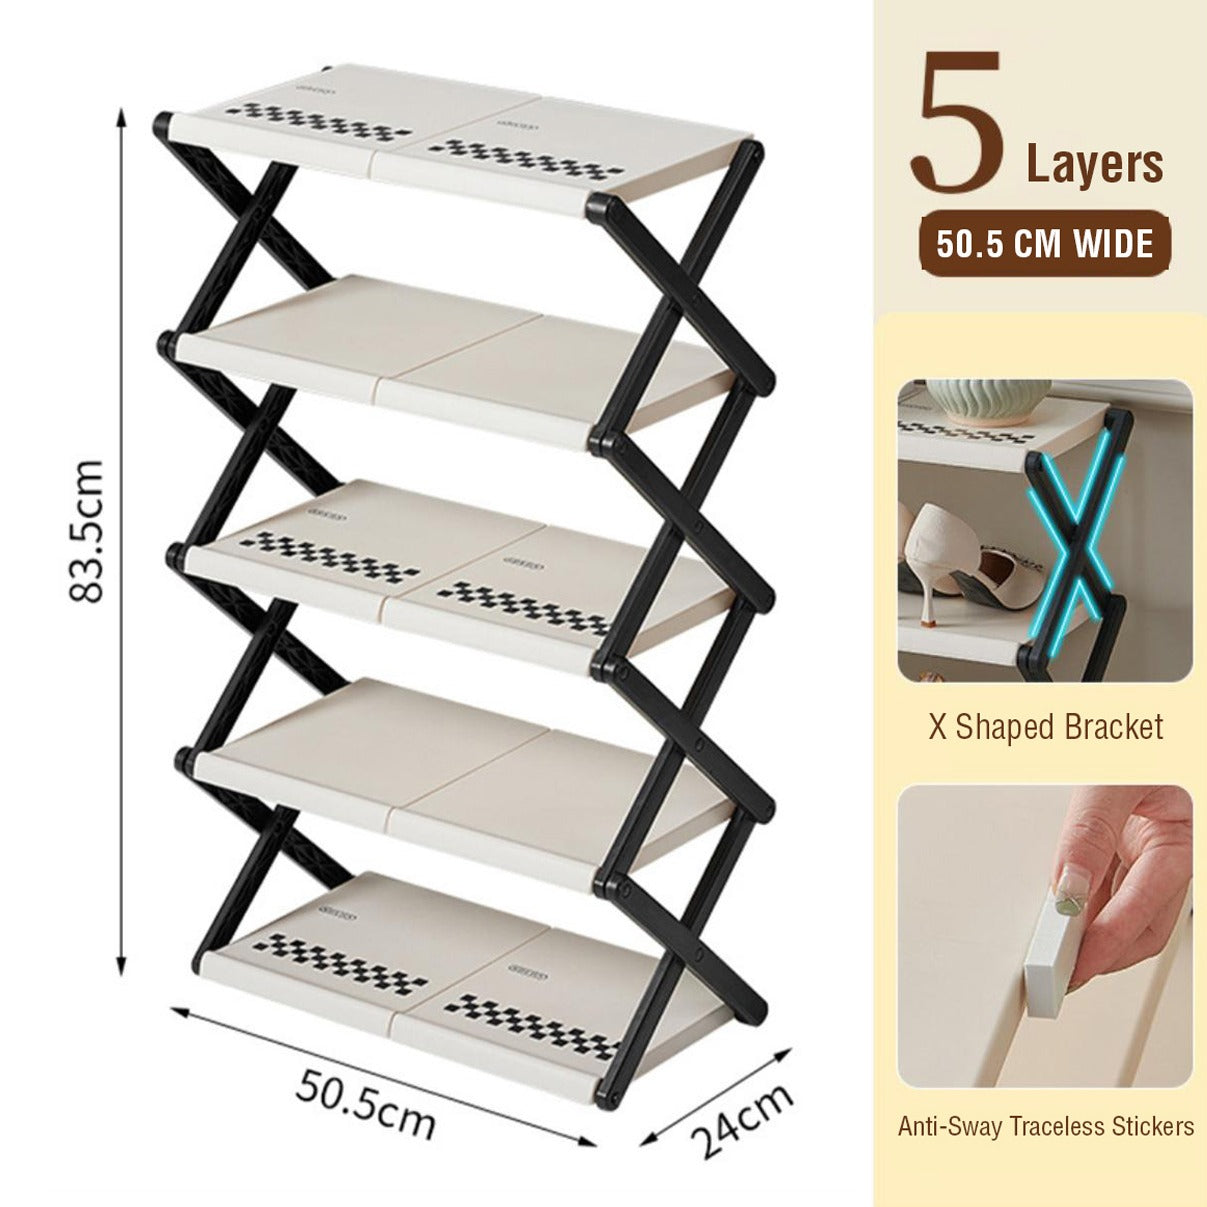 Foldable 5-Layer Shoe Rack Shelf with its size